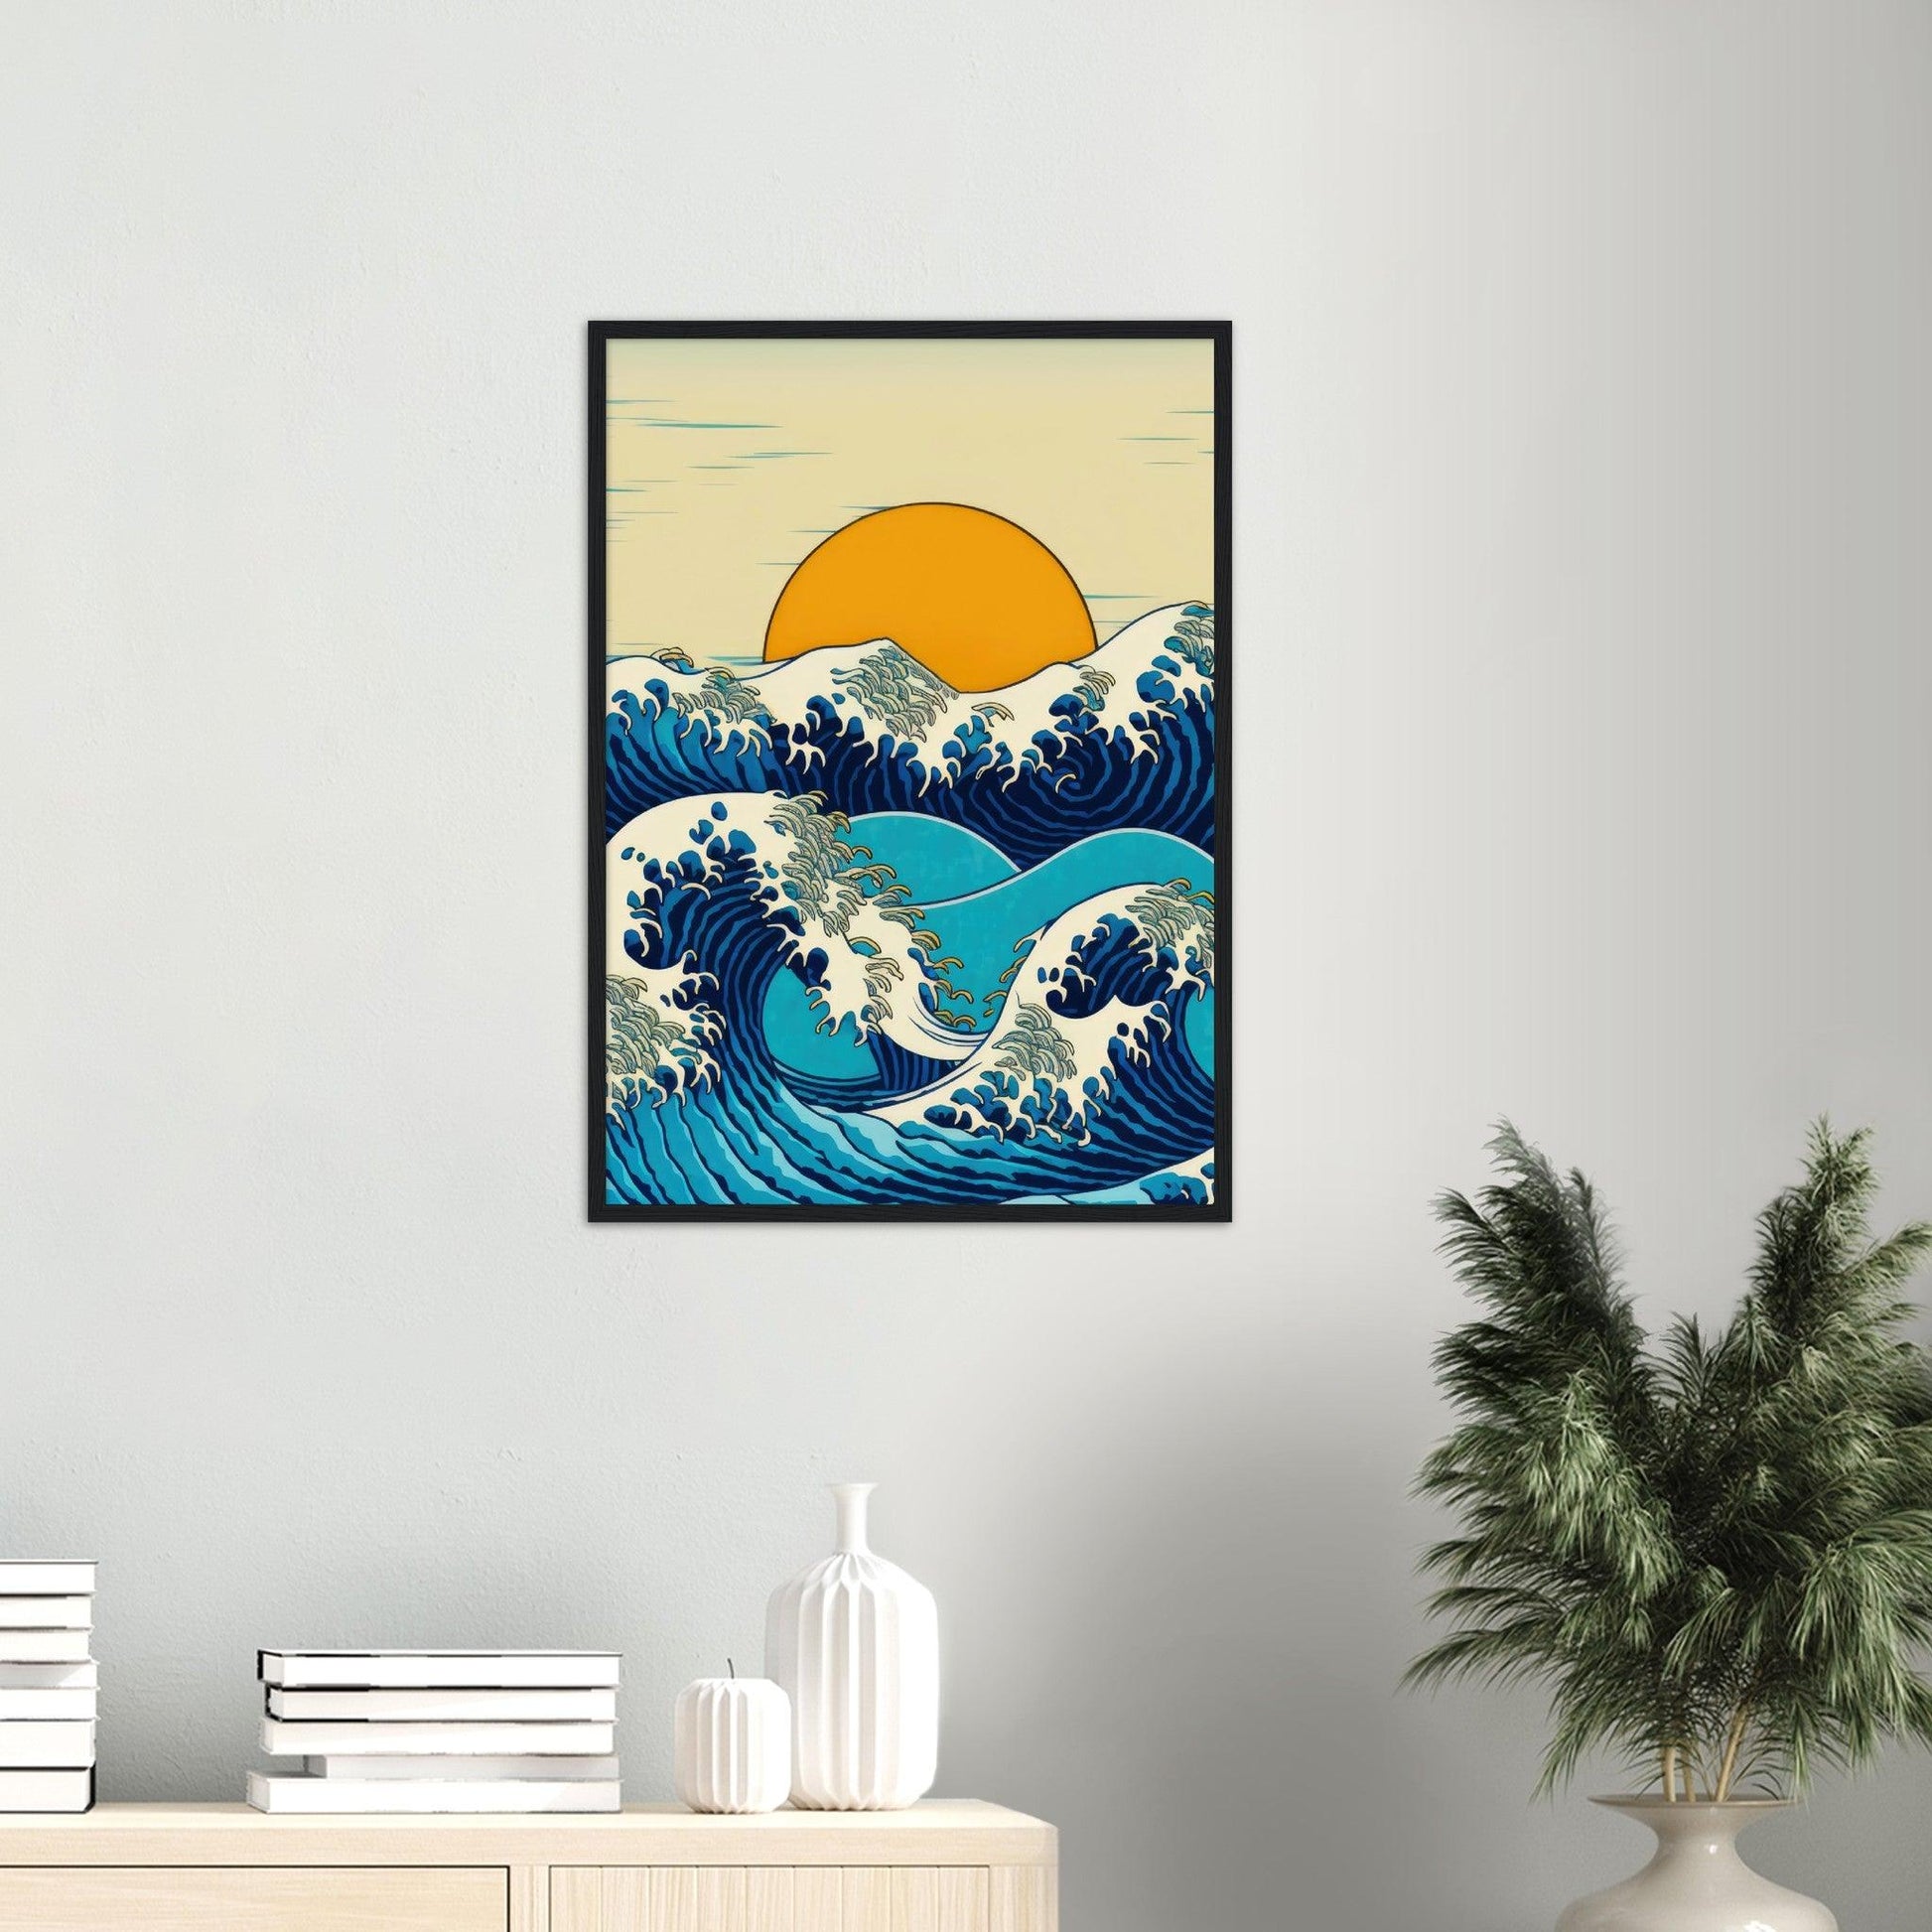 Sunset over waves - Masters in Art